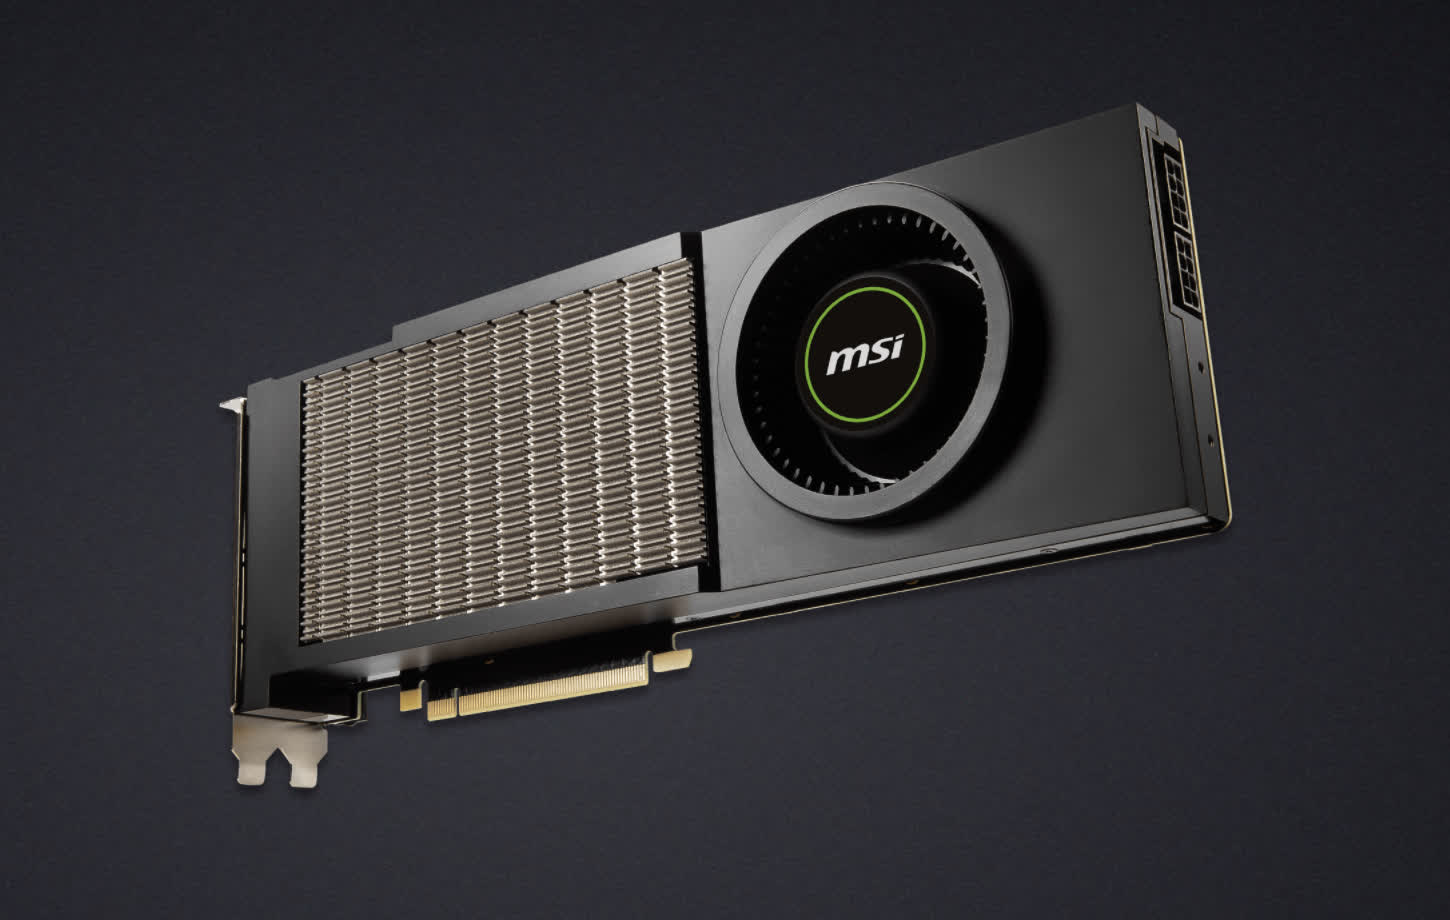 MSI's new RTX 3090 looks like a knock-off GTX 480